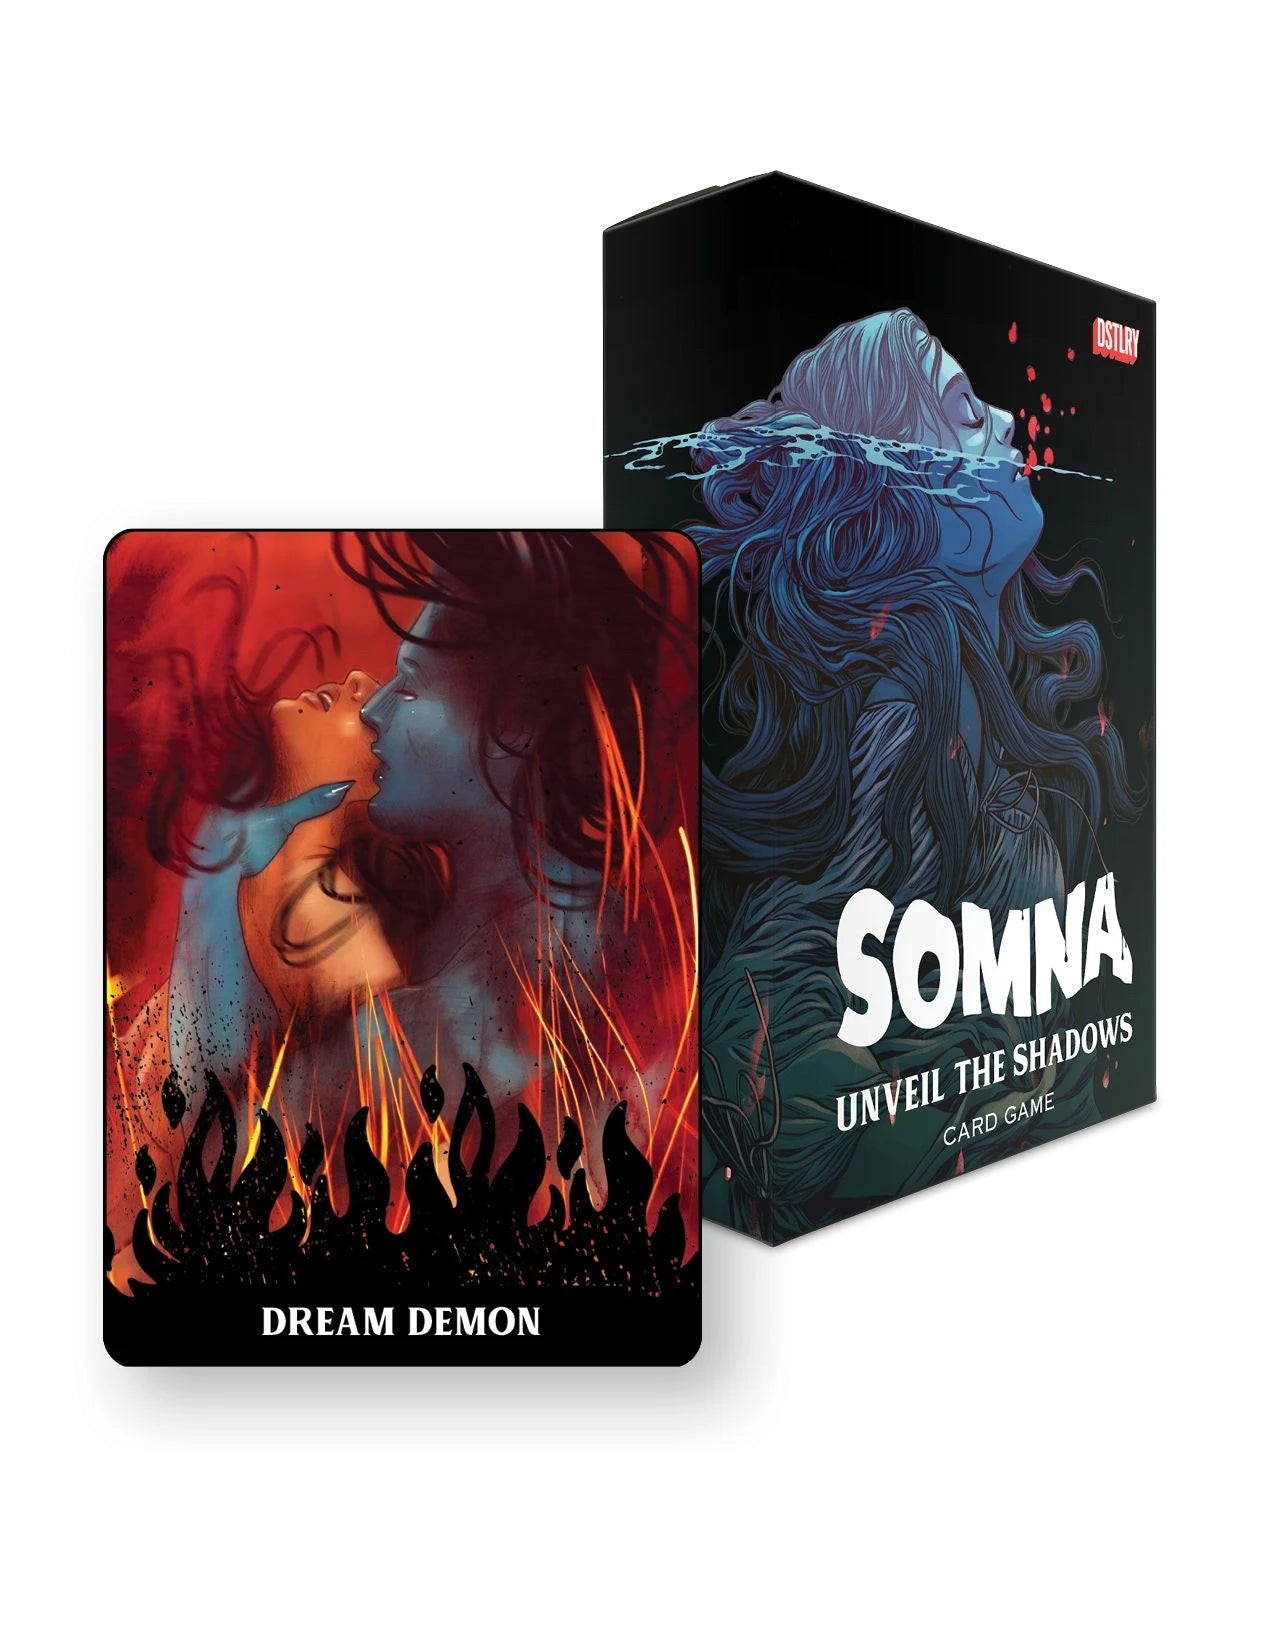 Somna Unveil The Shadows Card Game